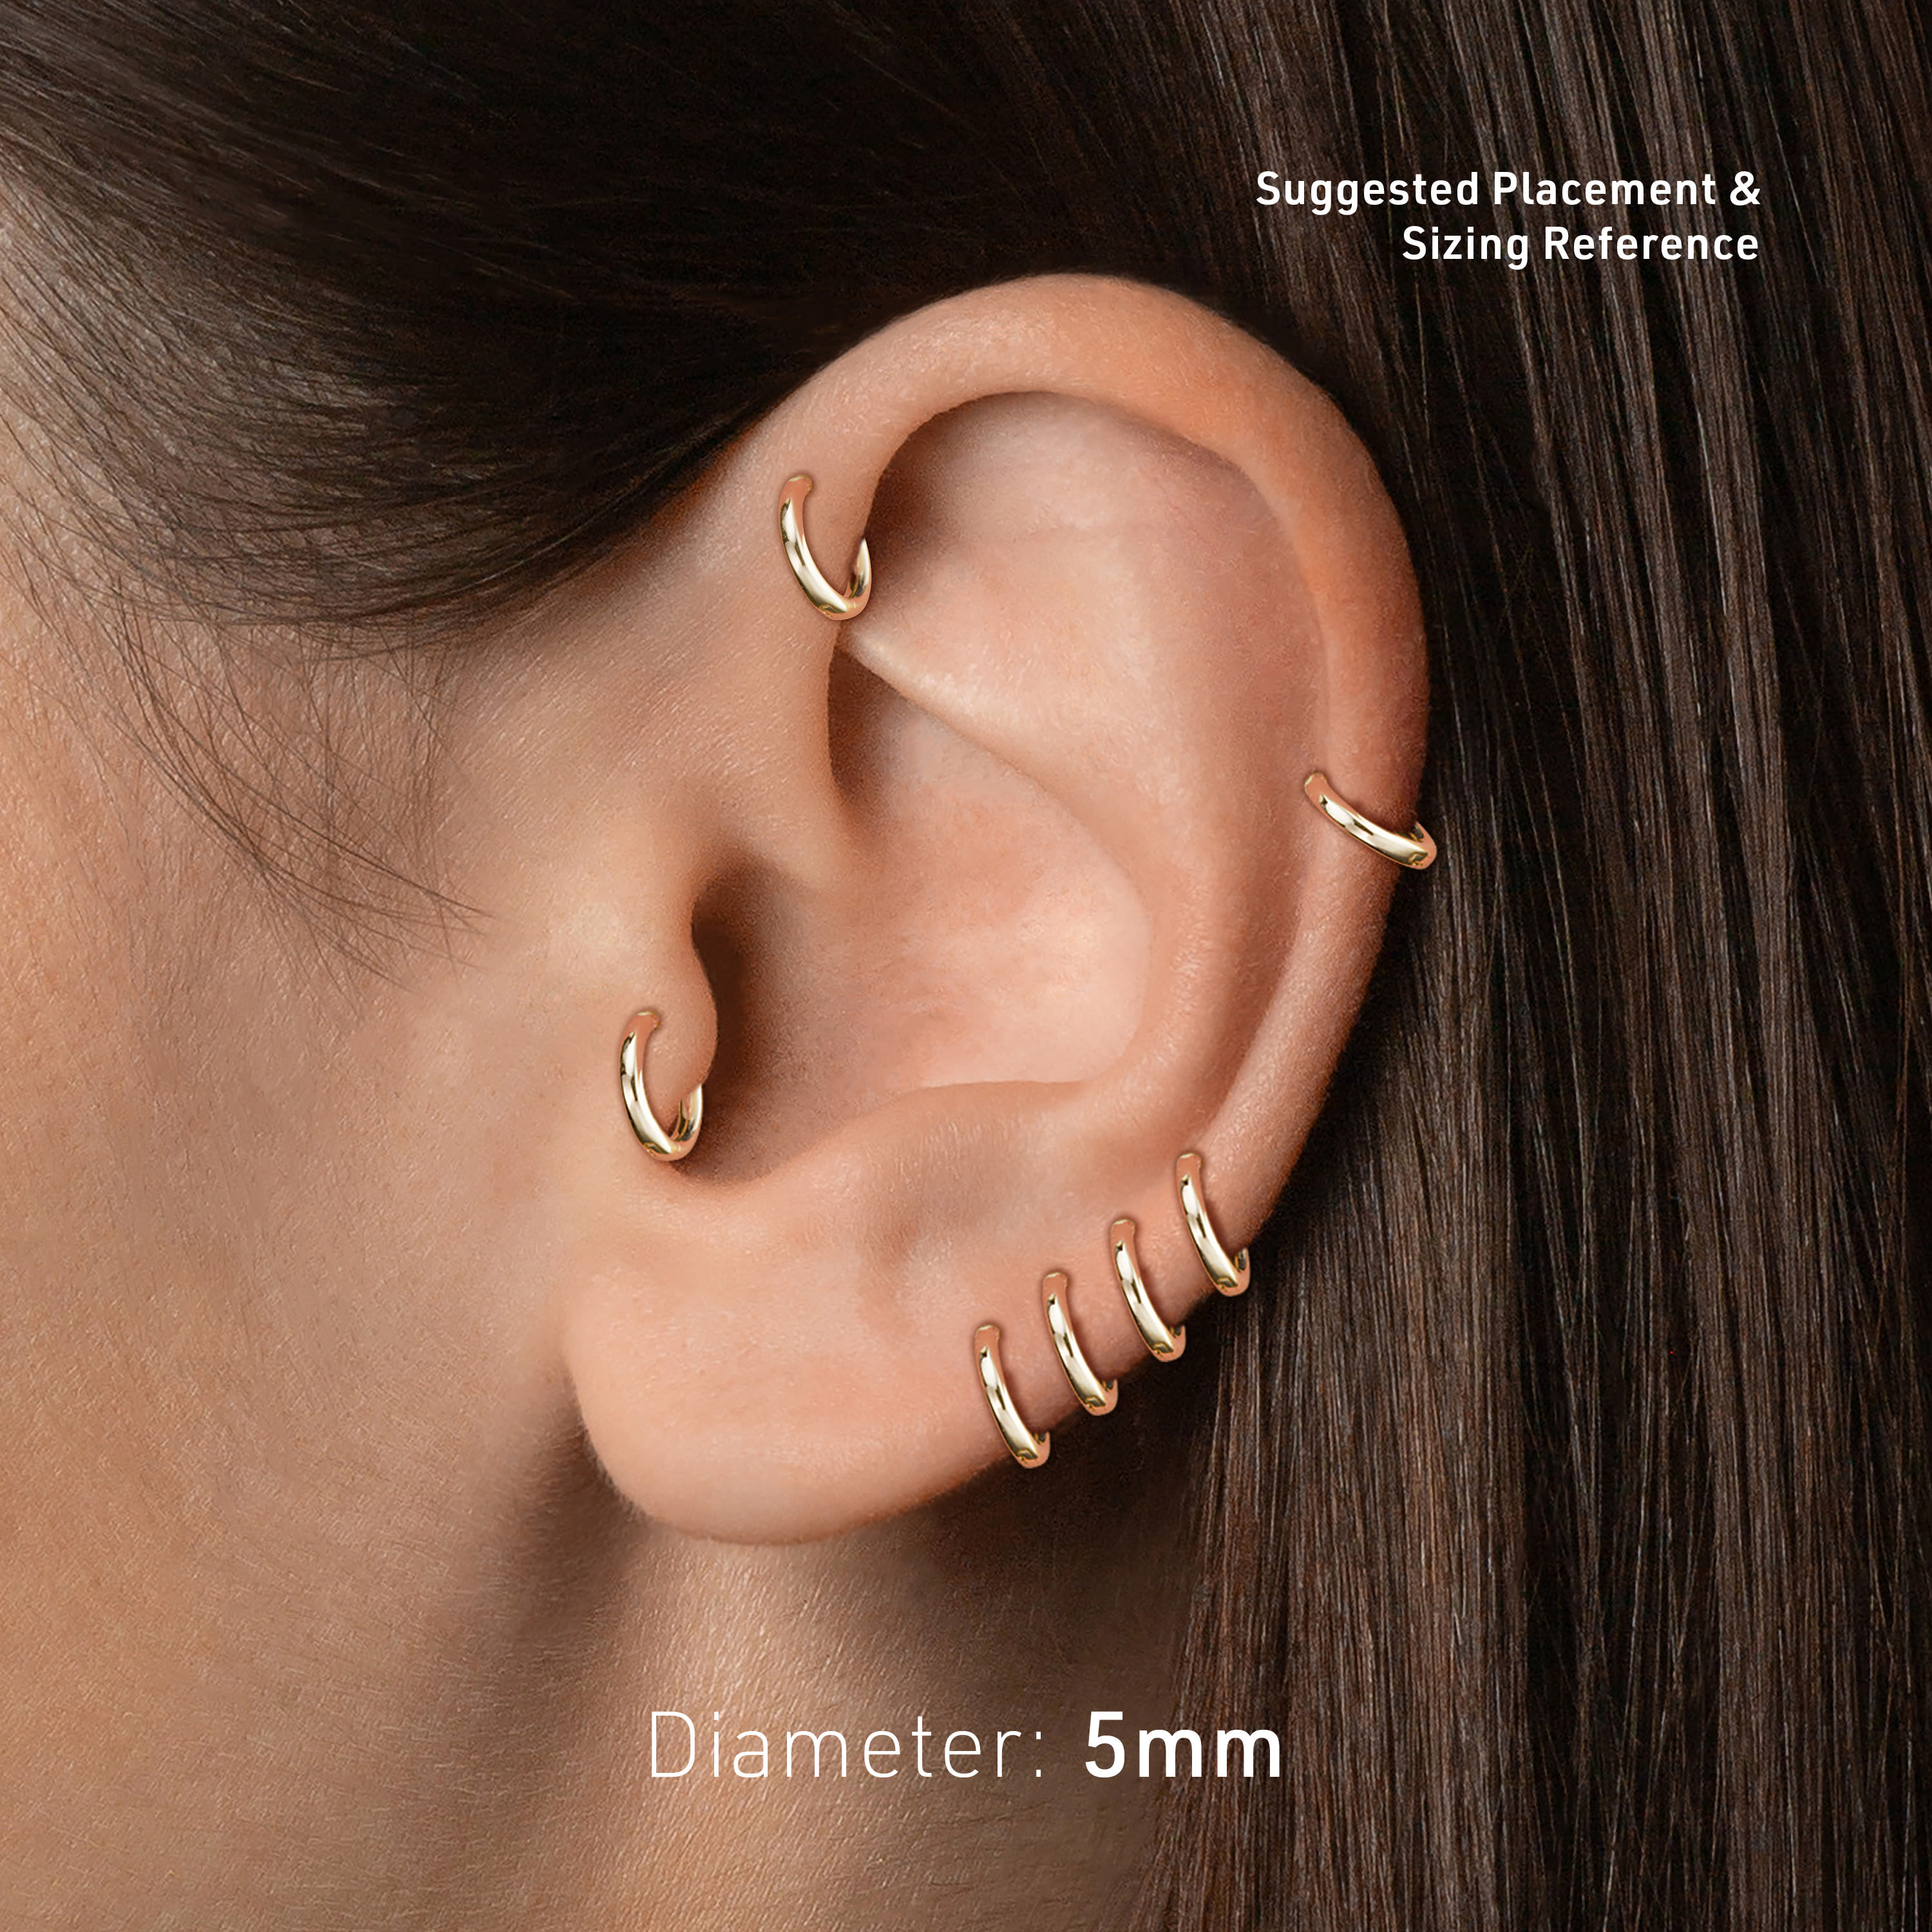 Suggested earlobe or cartilage placement for 5mm hoop earring size guide